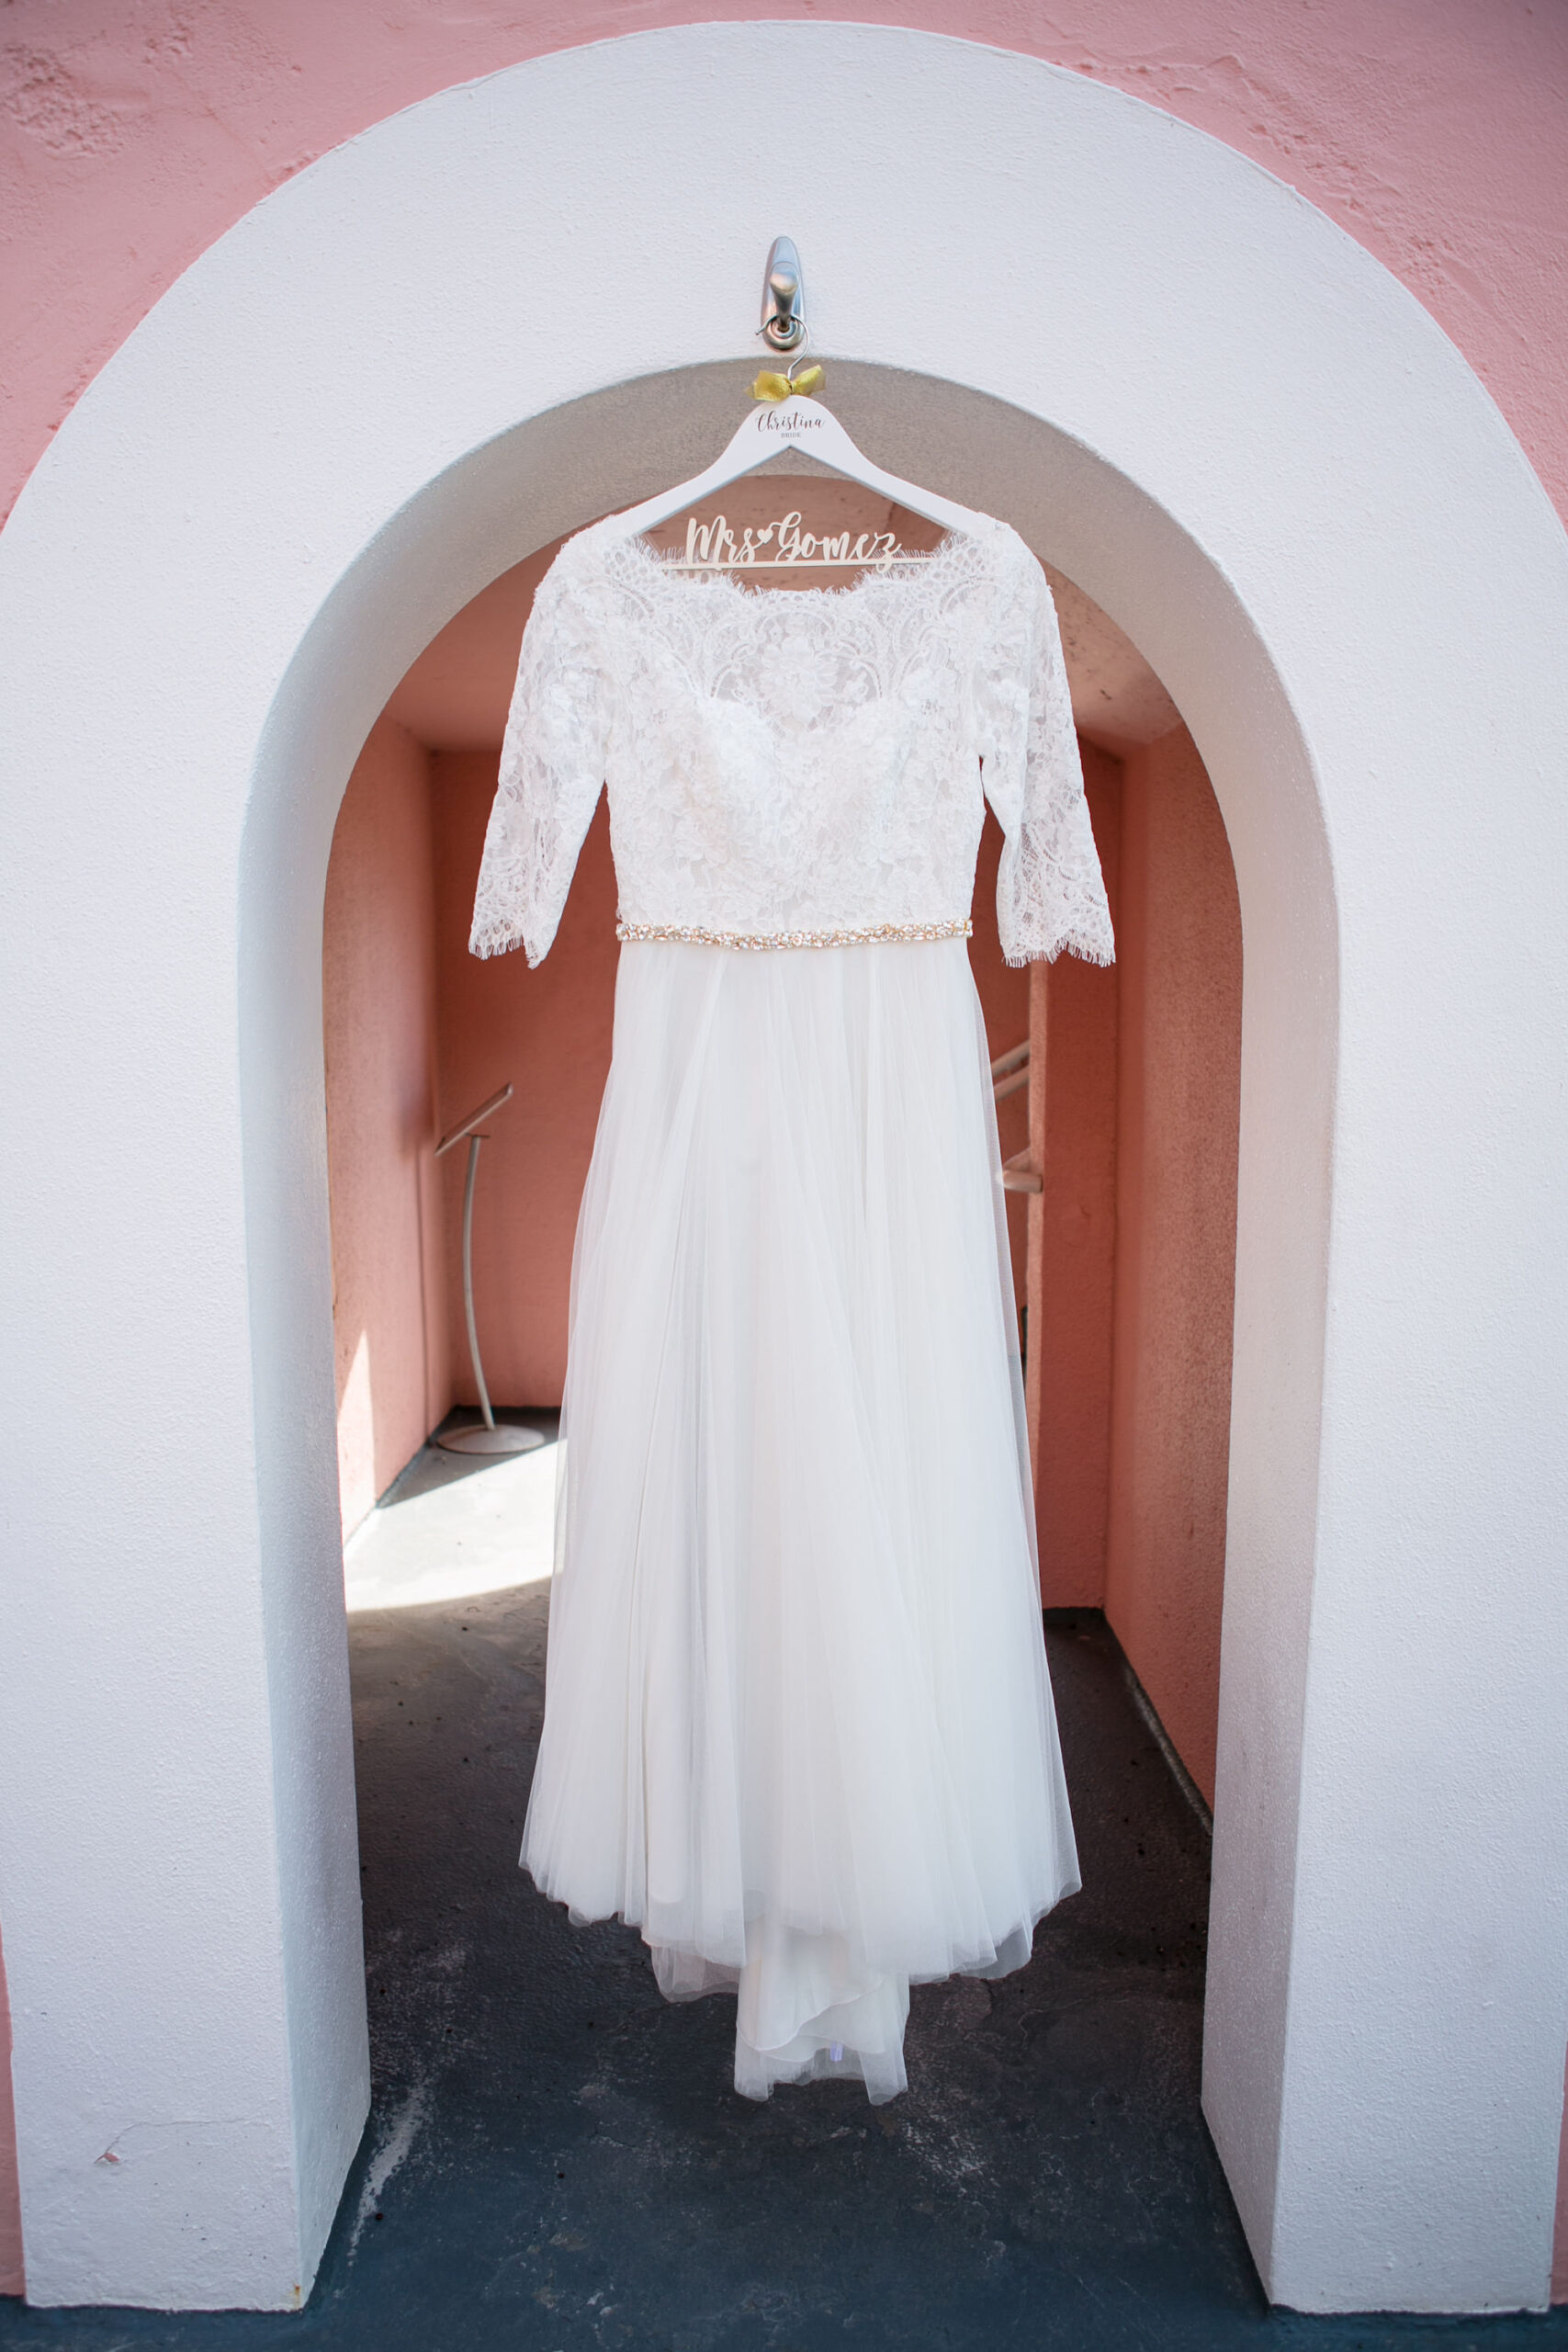 Classic Lace Half Sleeve Bodice and Tulle Skirt Wedding Dress with Yellow Gold Rhinestone Belt | Tampa Bay Wedding Photographer Carrie Wildes Photography